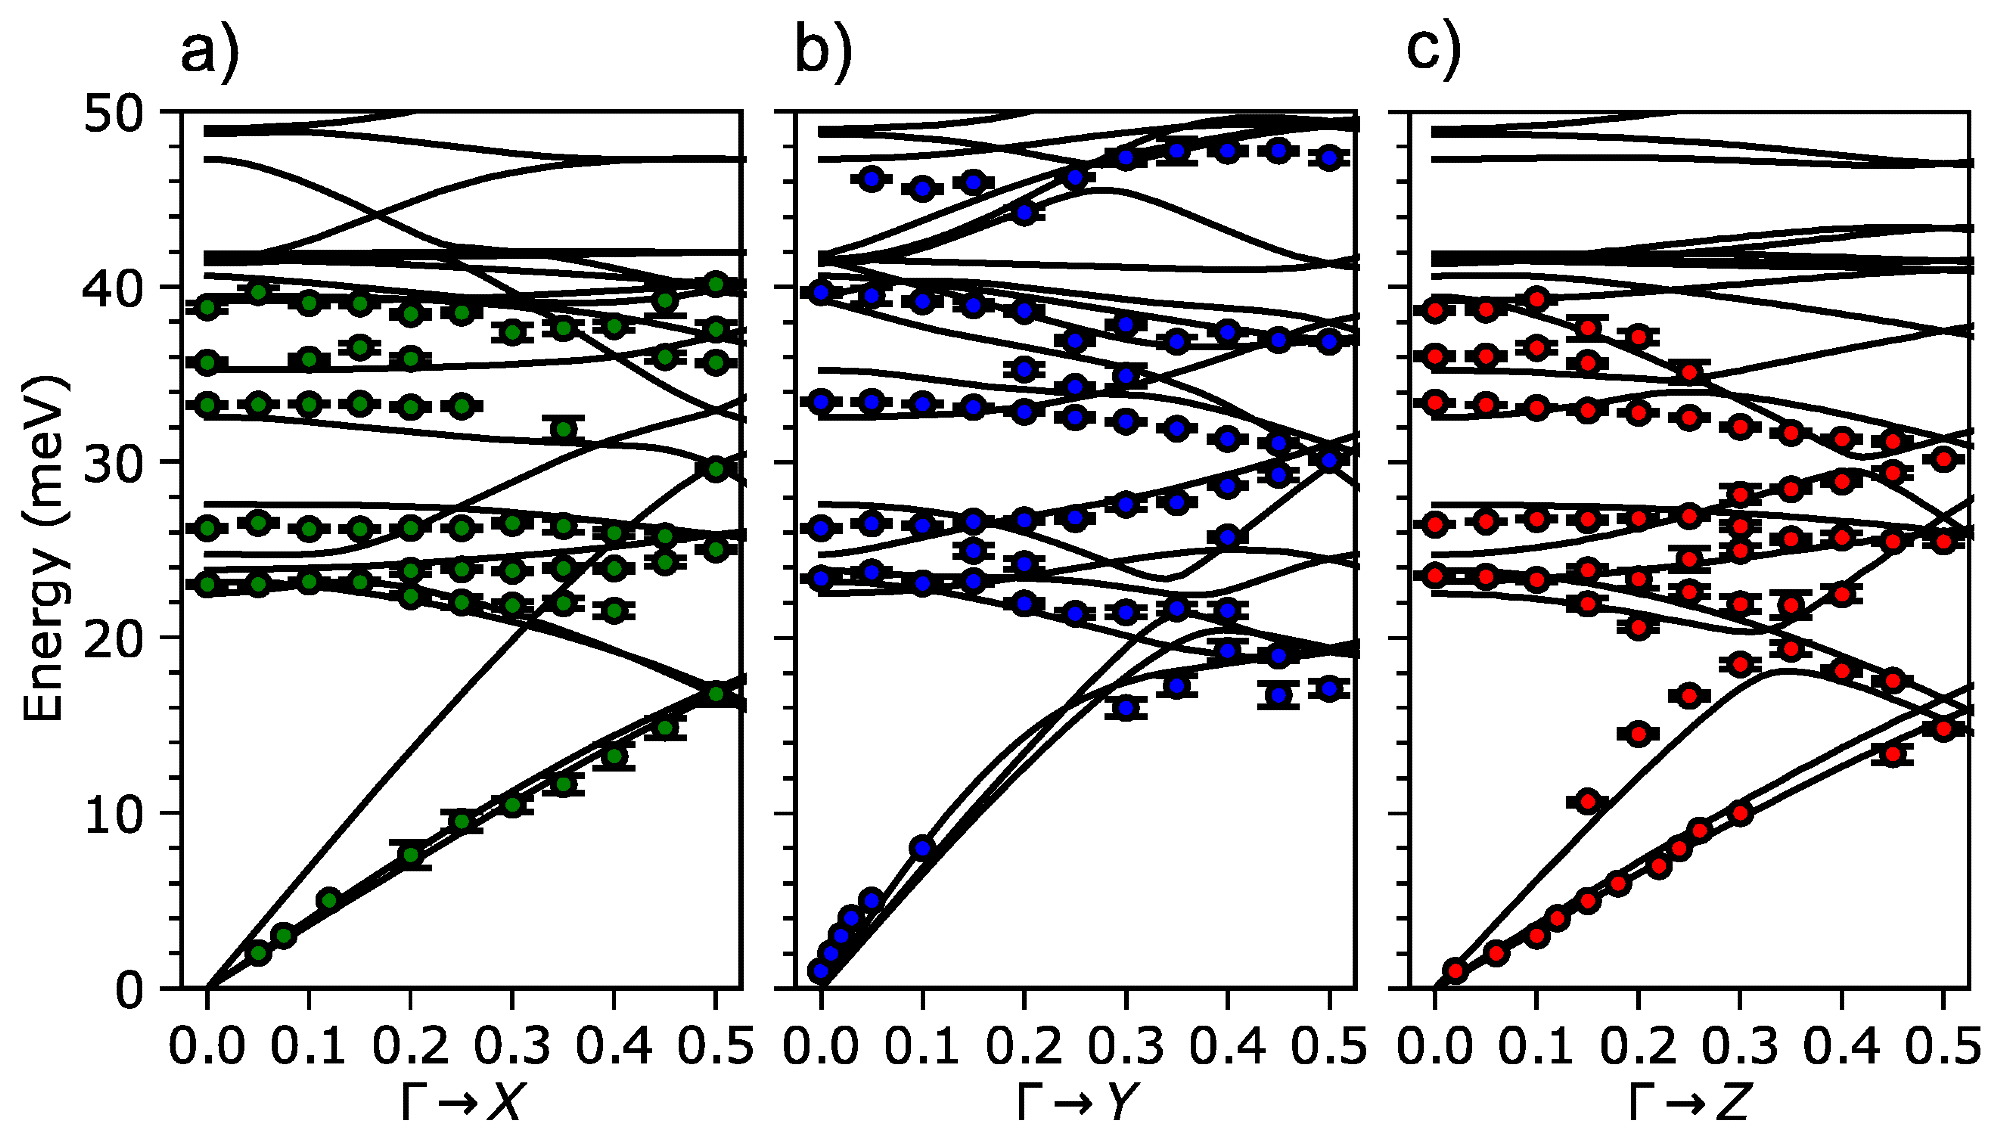 Phonon energies in FeP extracted from TOF data with the help of the Phonon Explorer software compared with DFT calculation results (a) G-X direction; (b) G-Y direction; (c) G-Z direction.